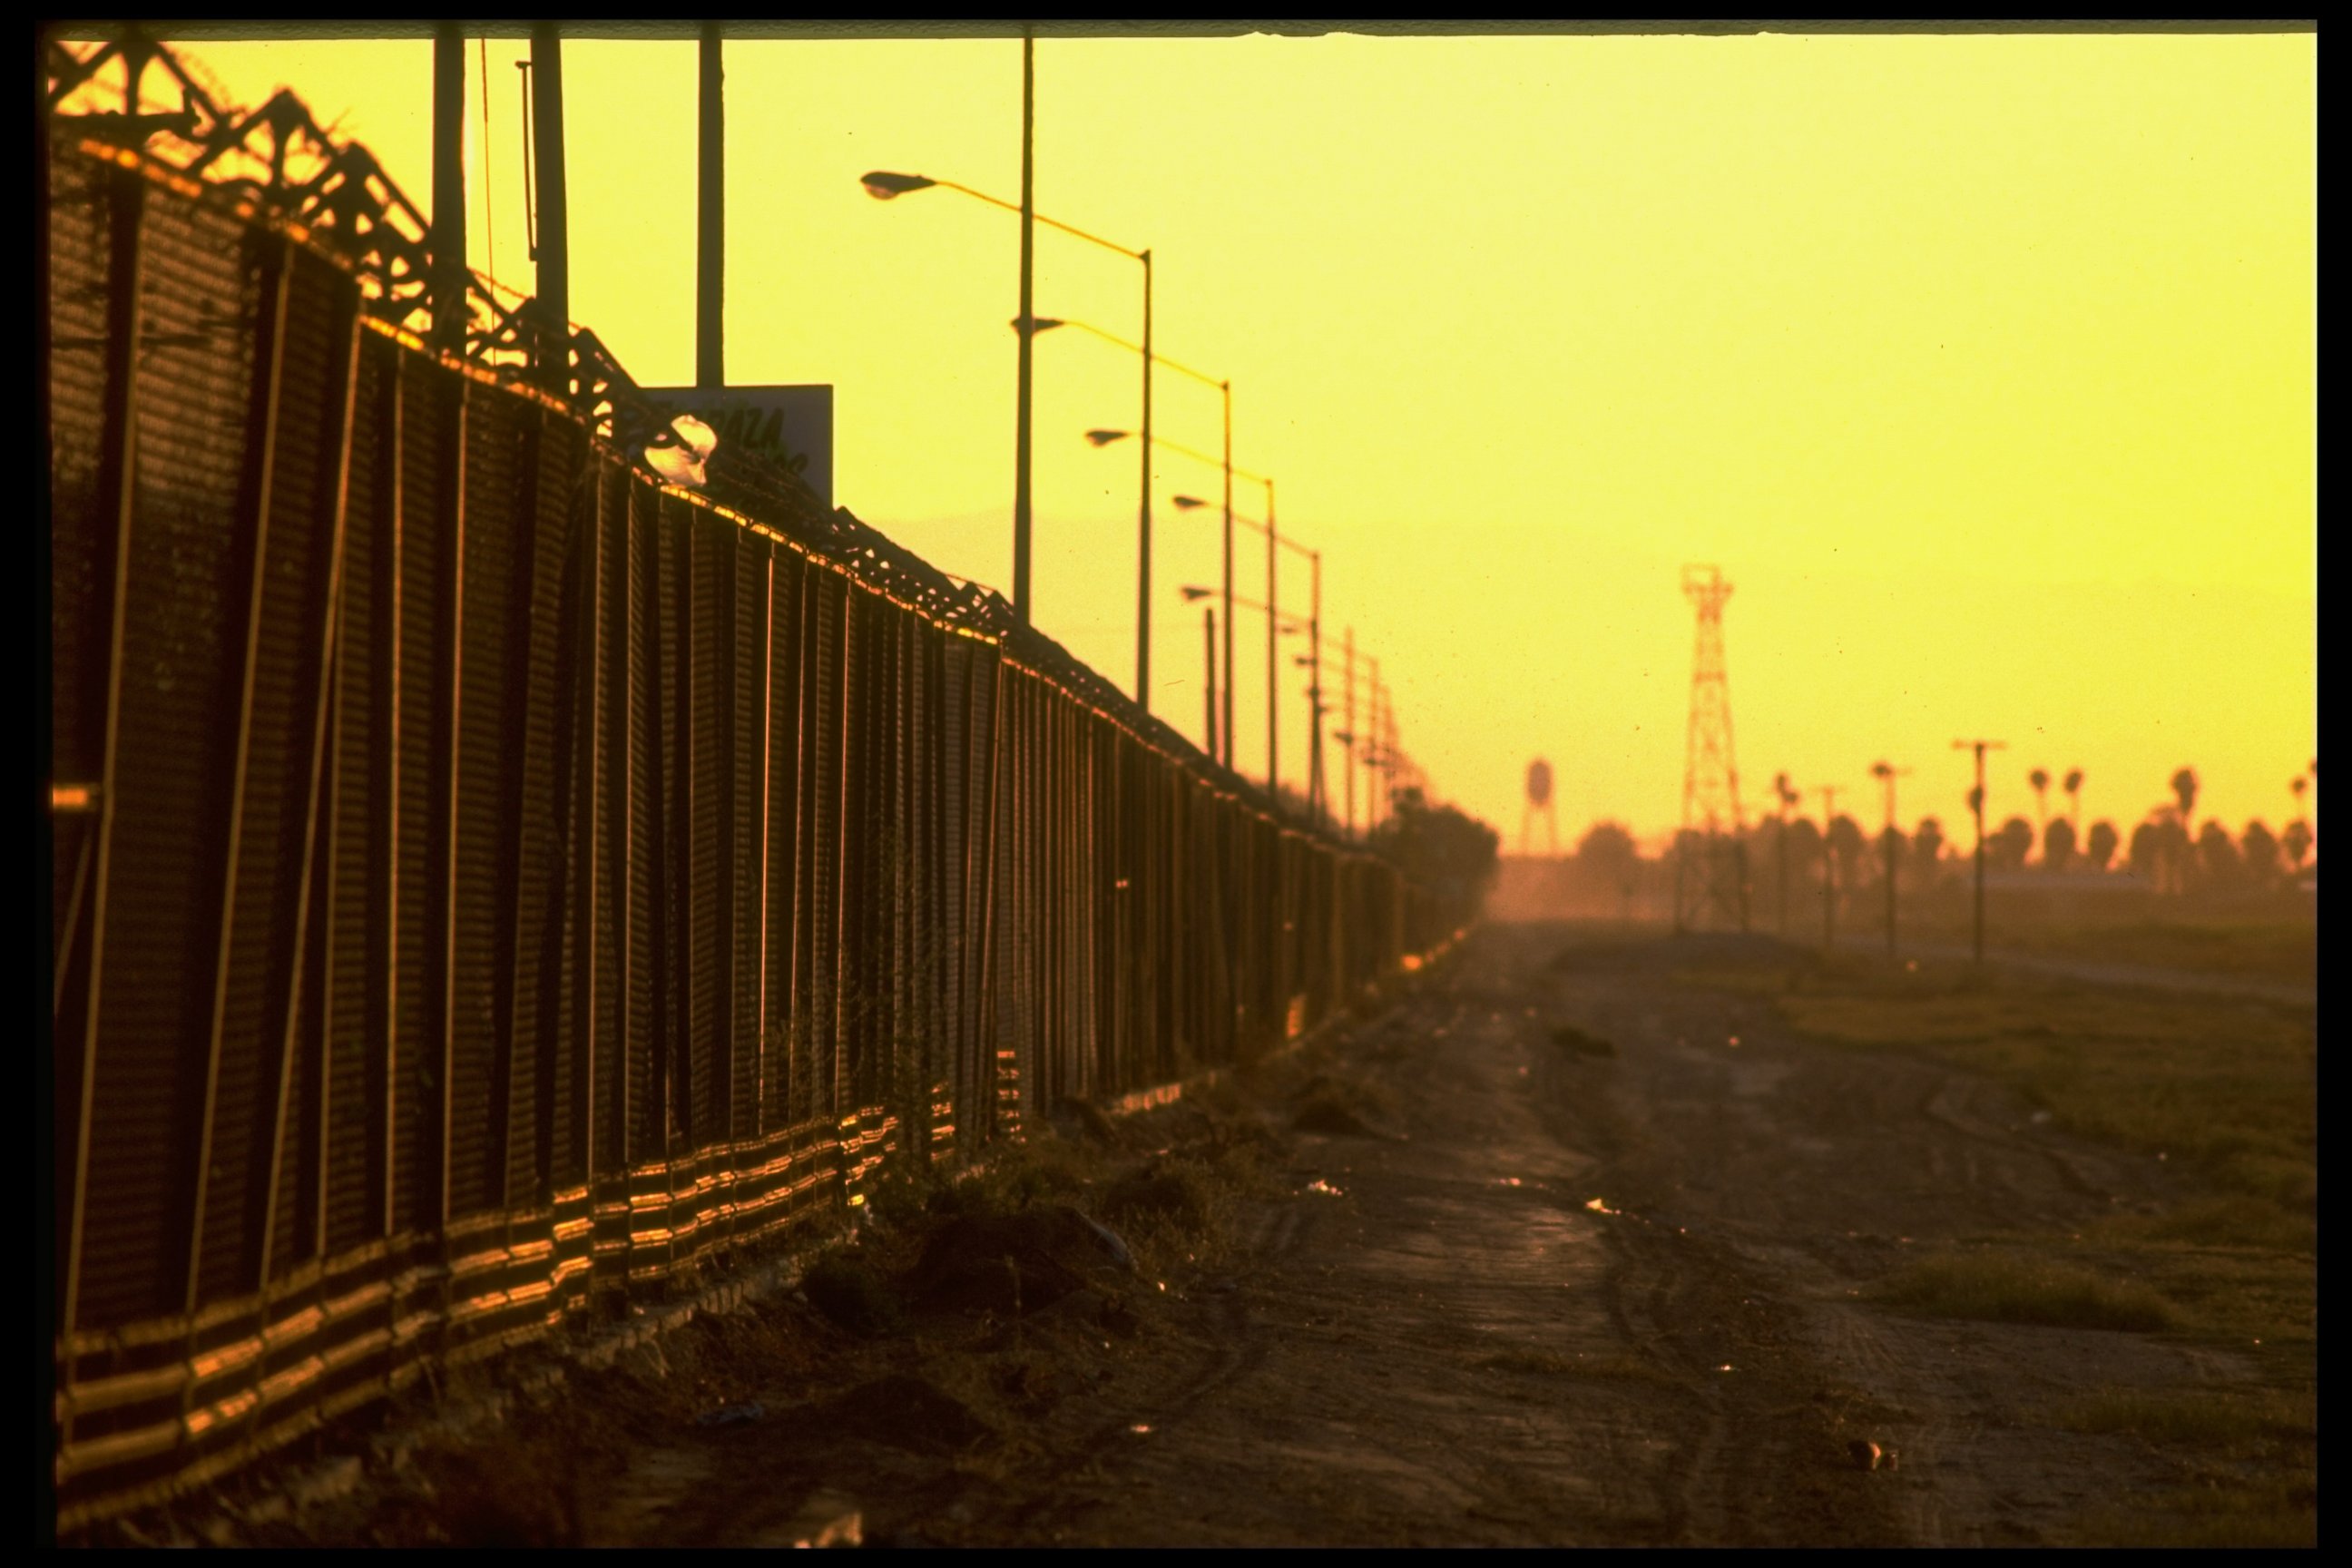 PHOTO: The border fence between Mexico and the US at Calexico, Calif. is pictured here in this undated photo.